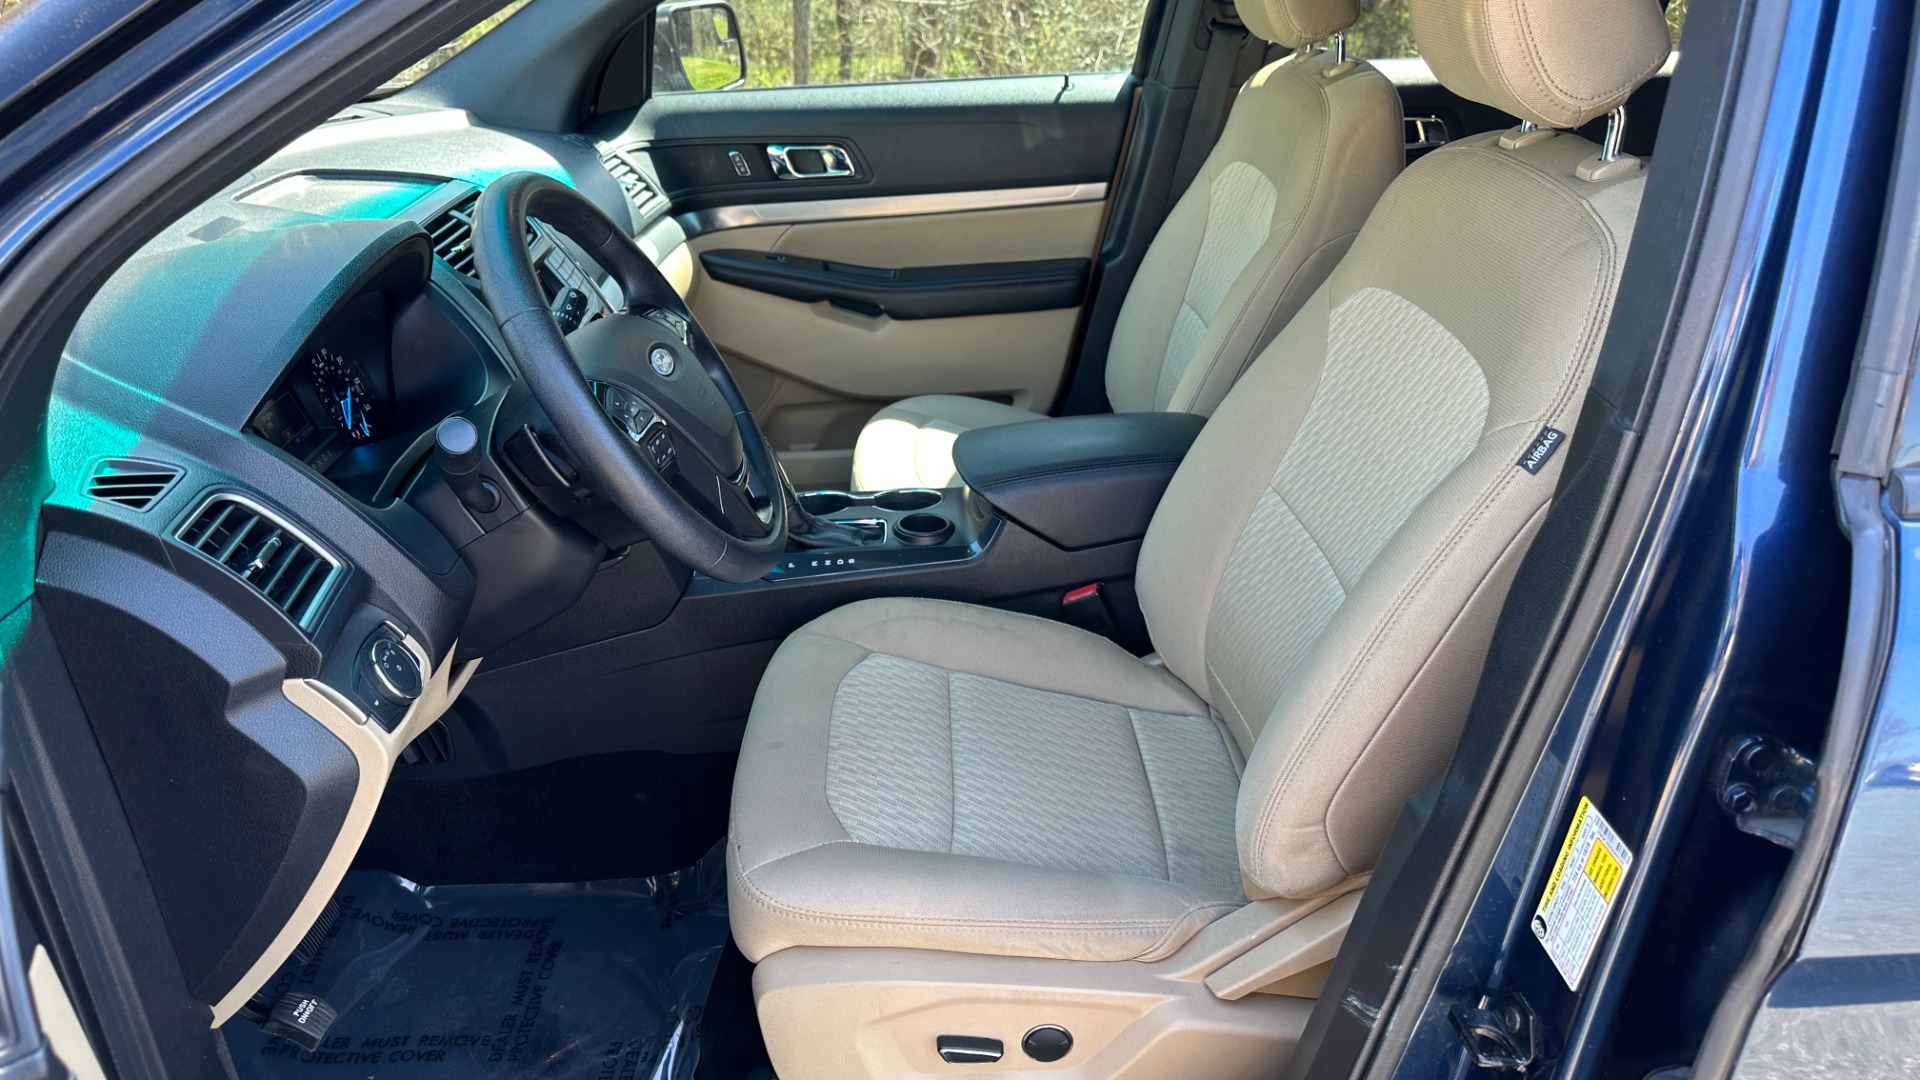 Used 2016 Ford Explorer FWD / 3.5L V6 ENGINE / 3RD ROW SEATING / CLOTH ...